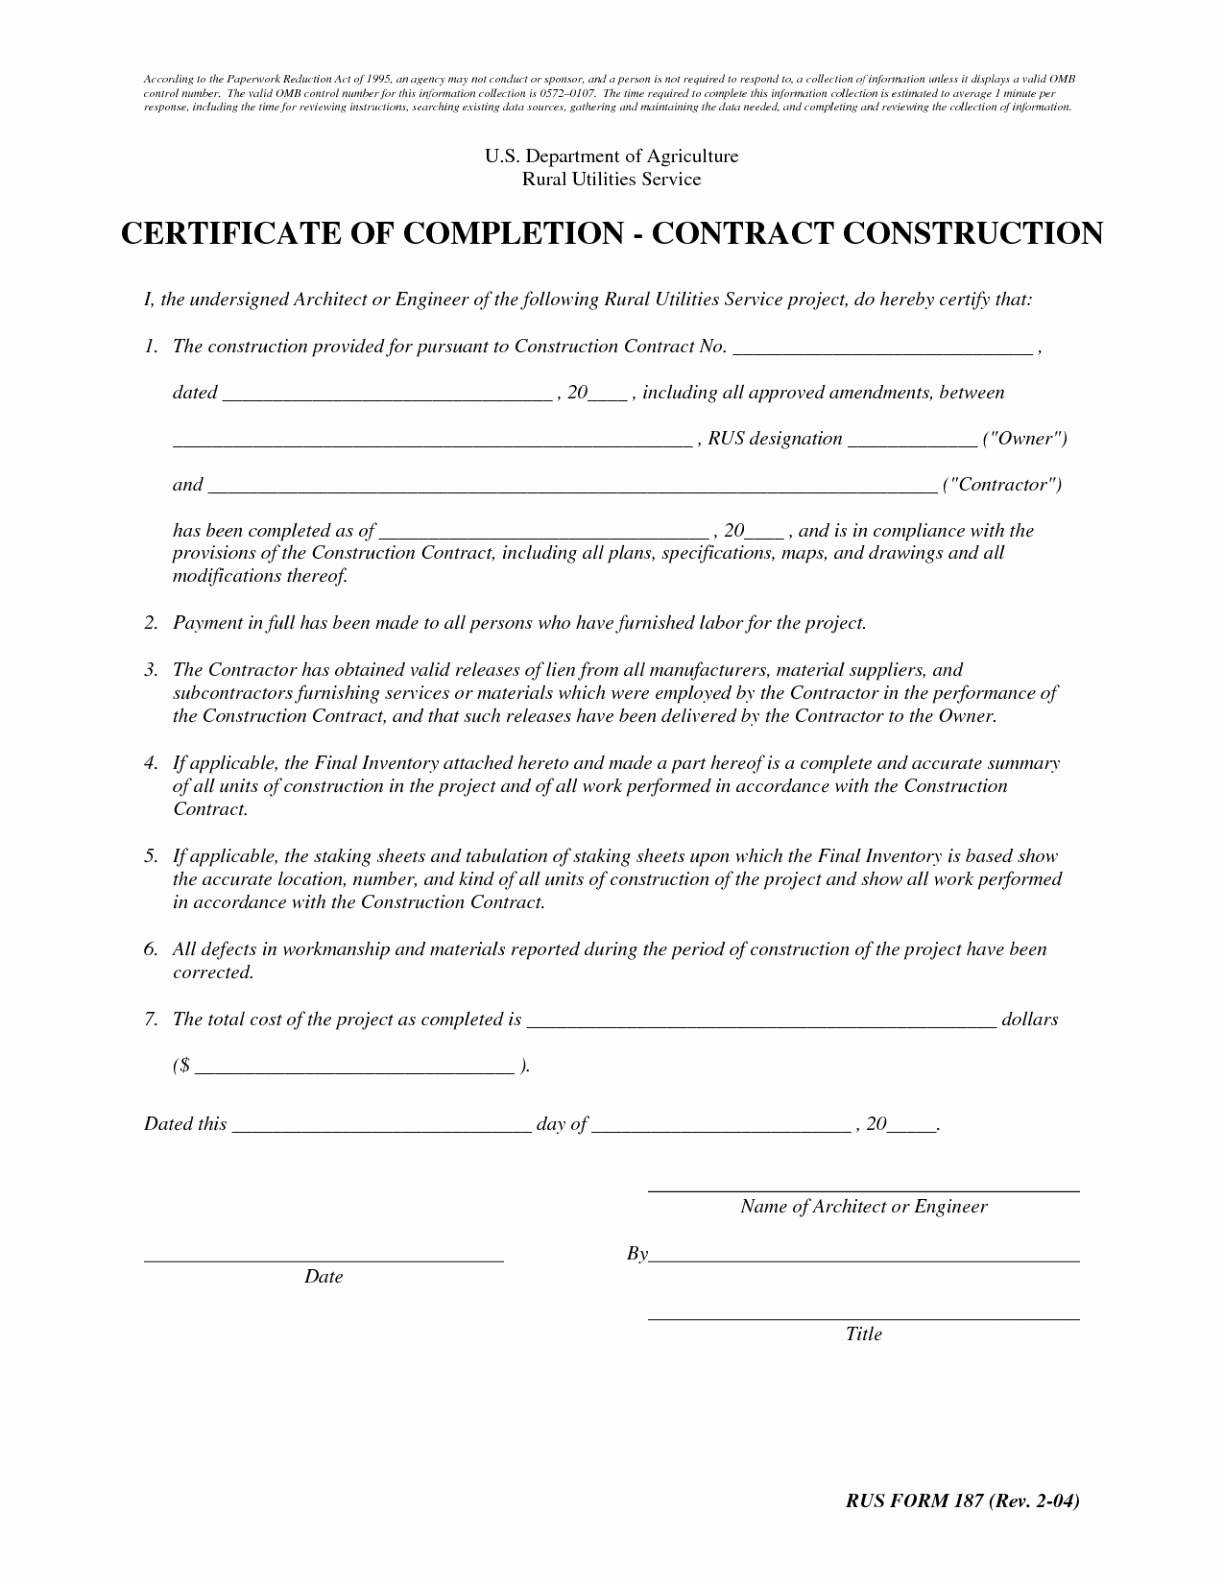 Sample Of Certificate Of Completion Of Construction Project For Construction Certificate Of Completion Template